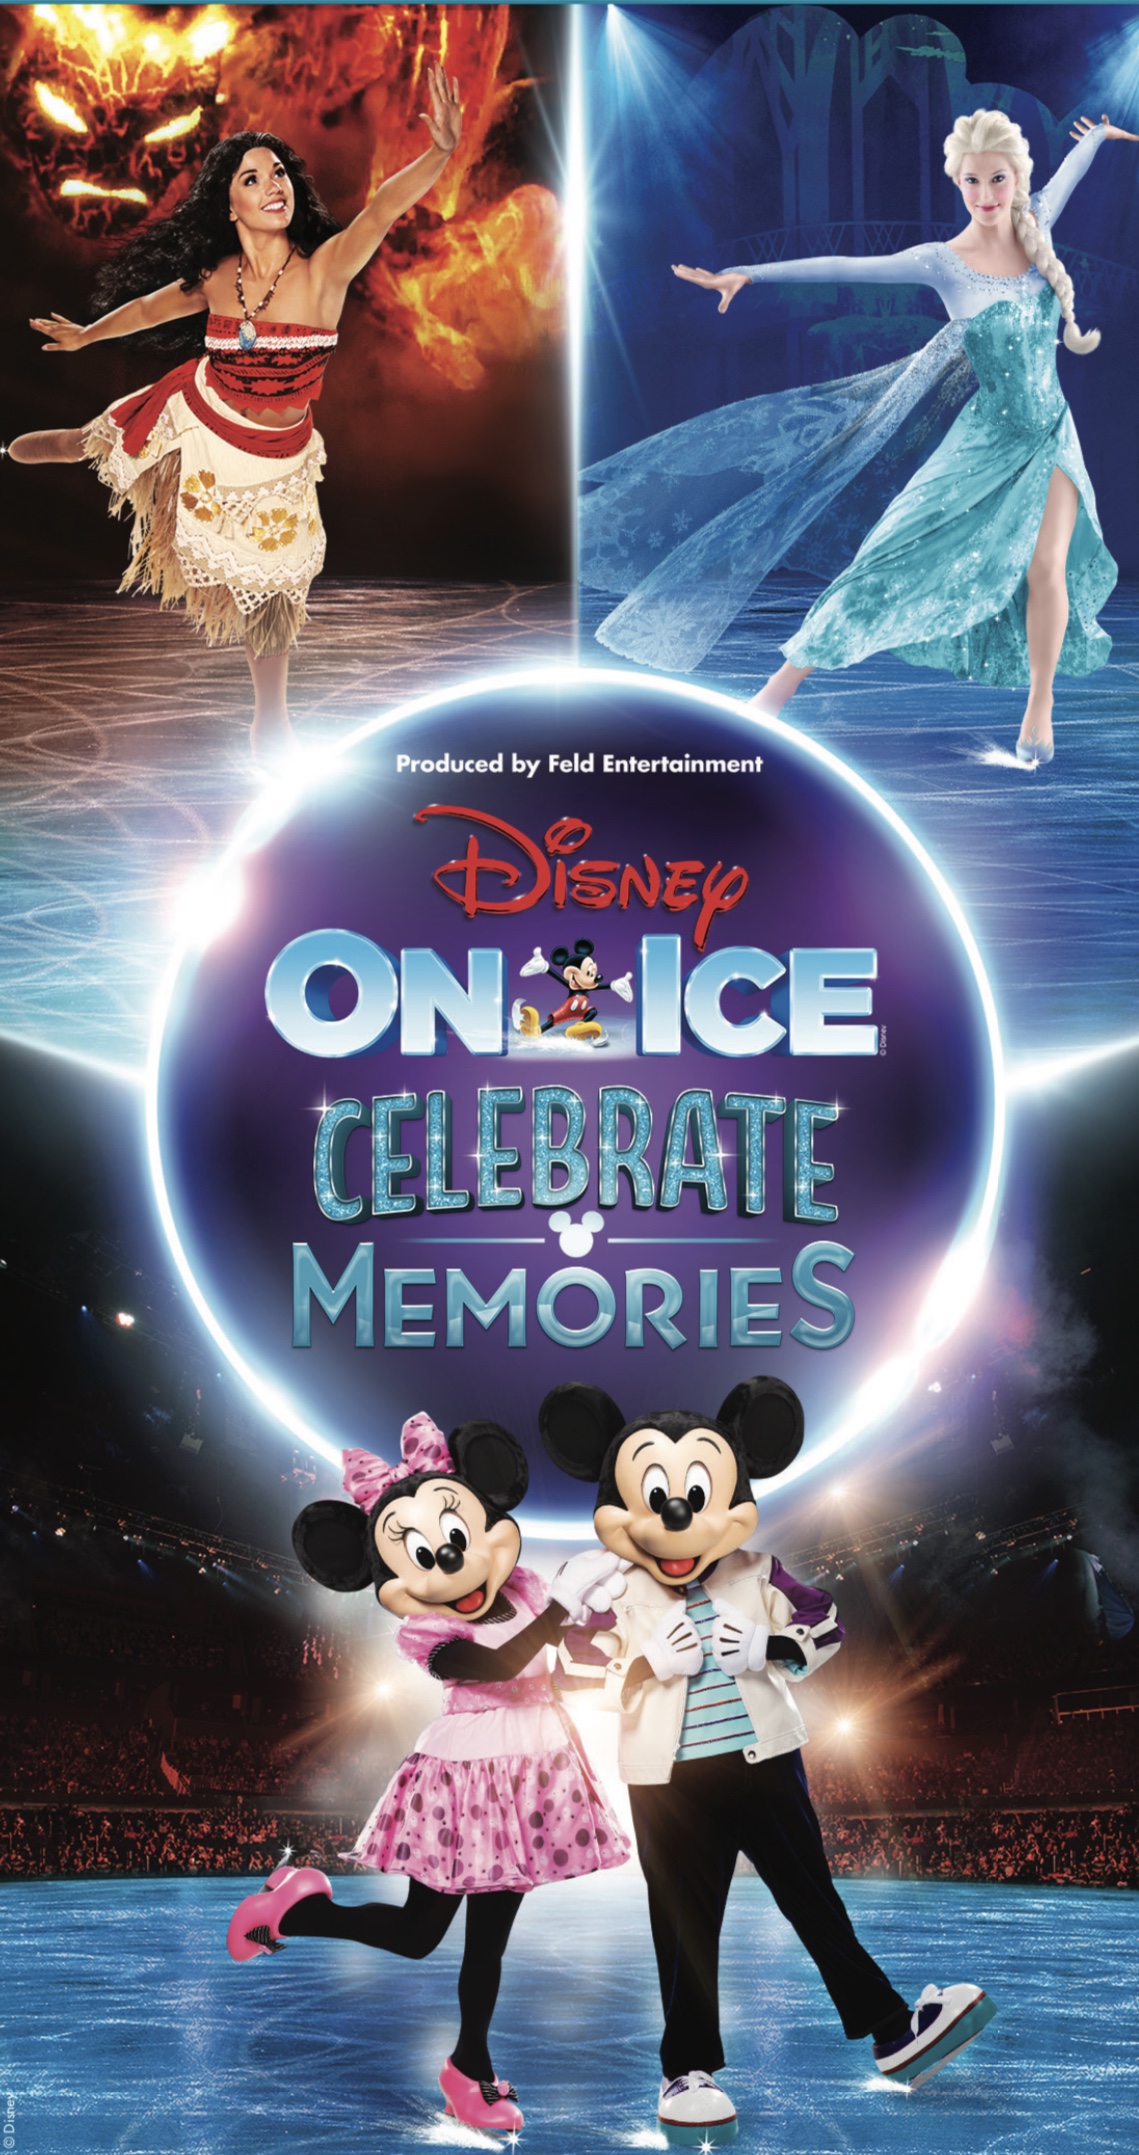 Disney On Ice Memories This March in Phoenix at Talking Stick Resort